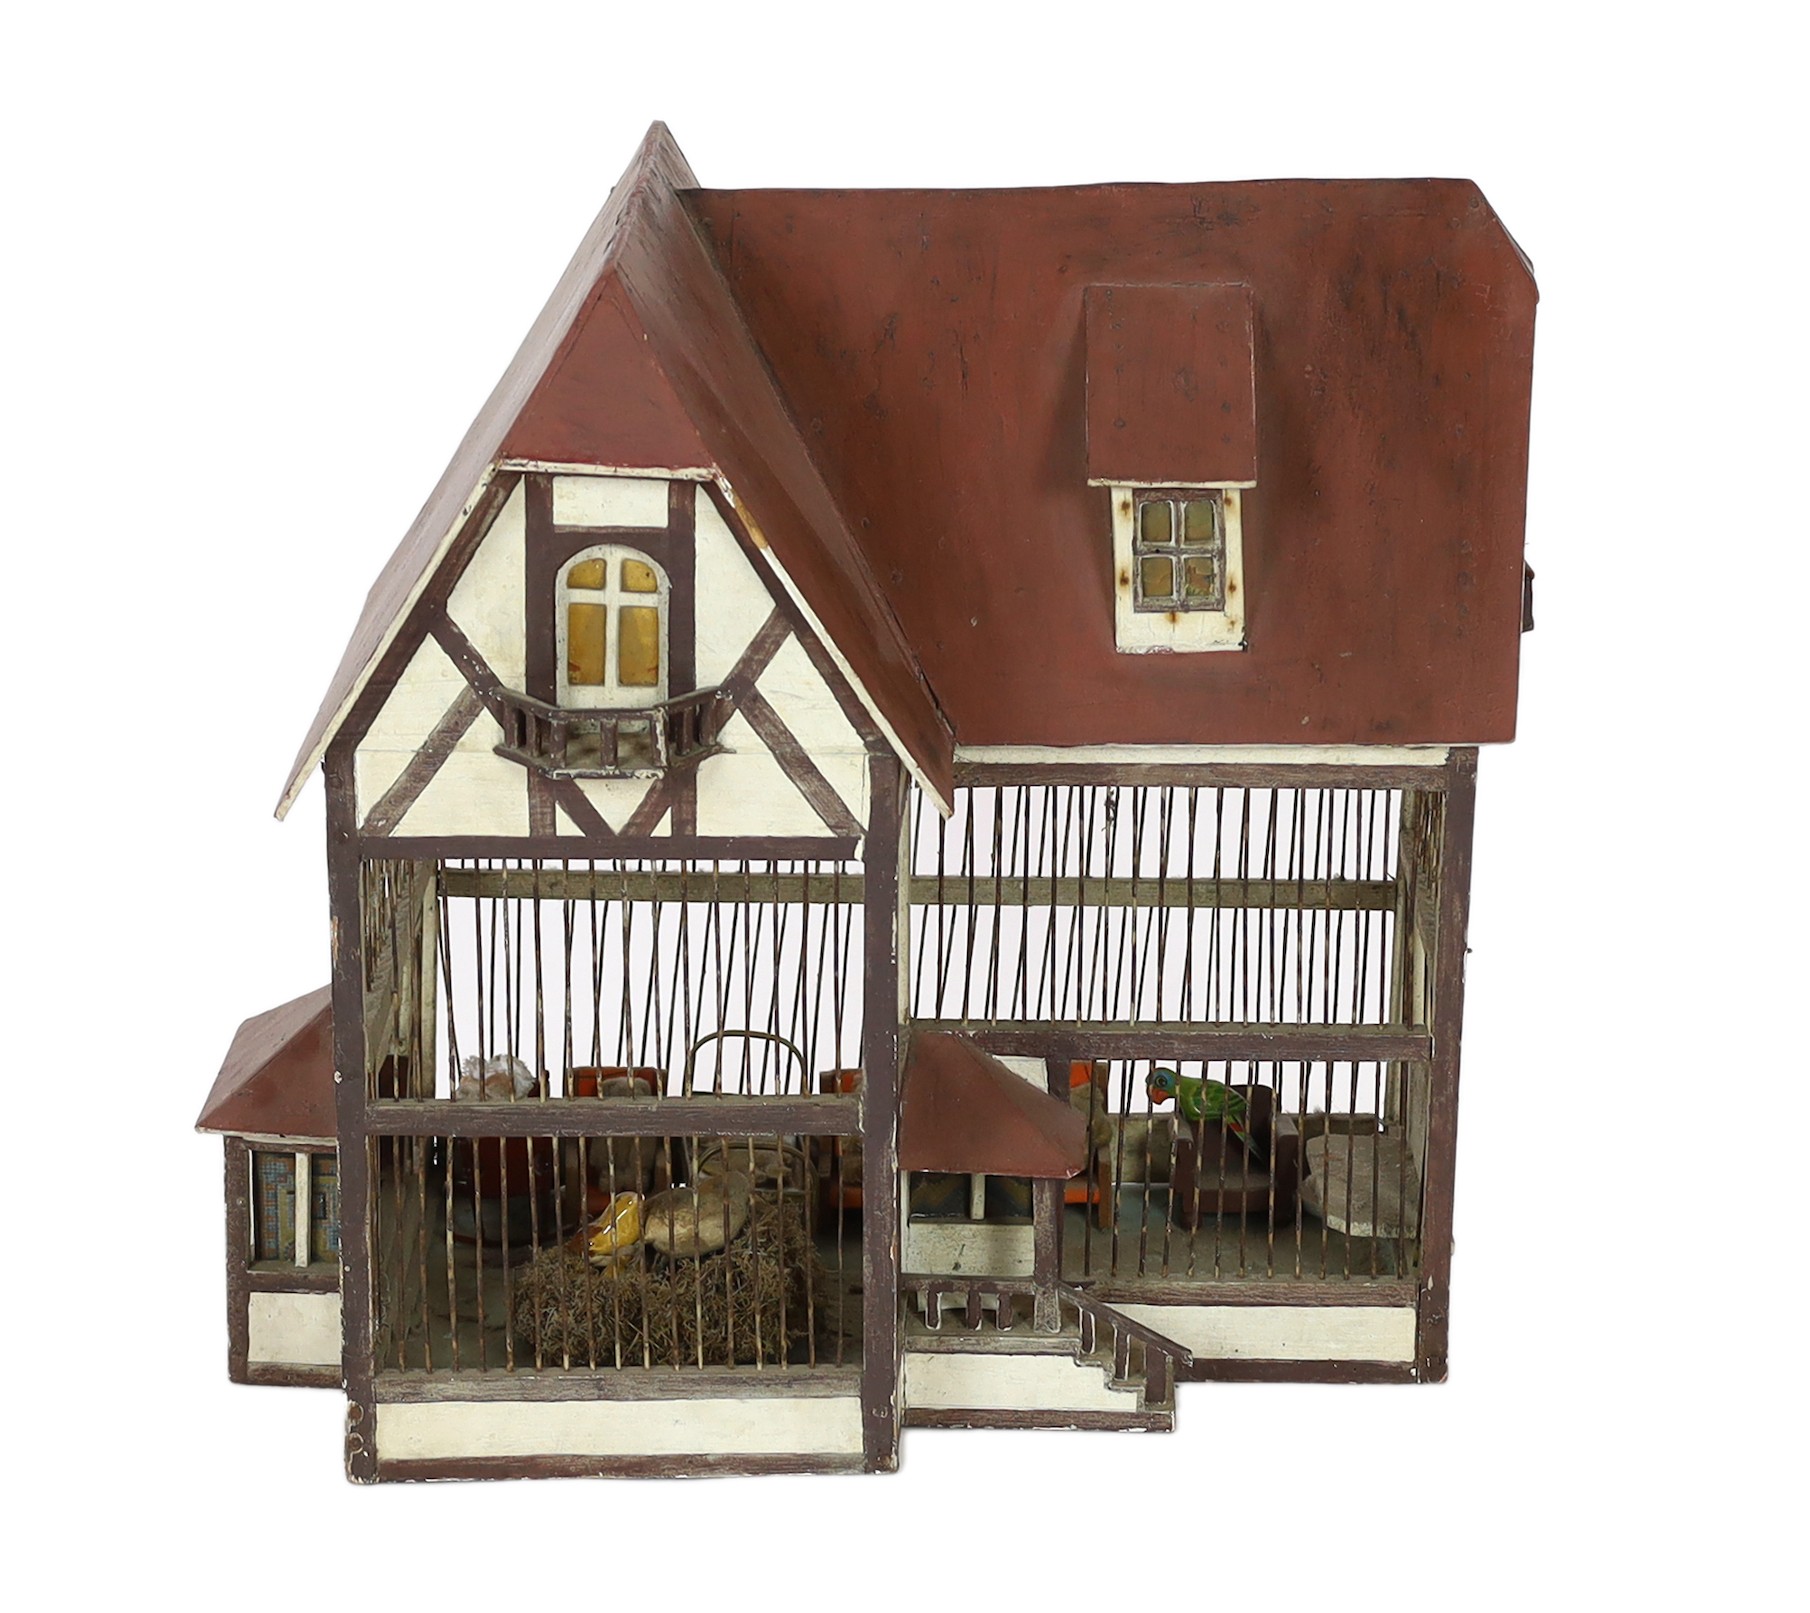 A German ‘birdcage’ dolls’ house, late 19th century, modelled as half-timbered house with red roof - Image 2 of 6